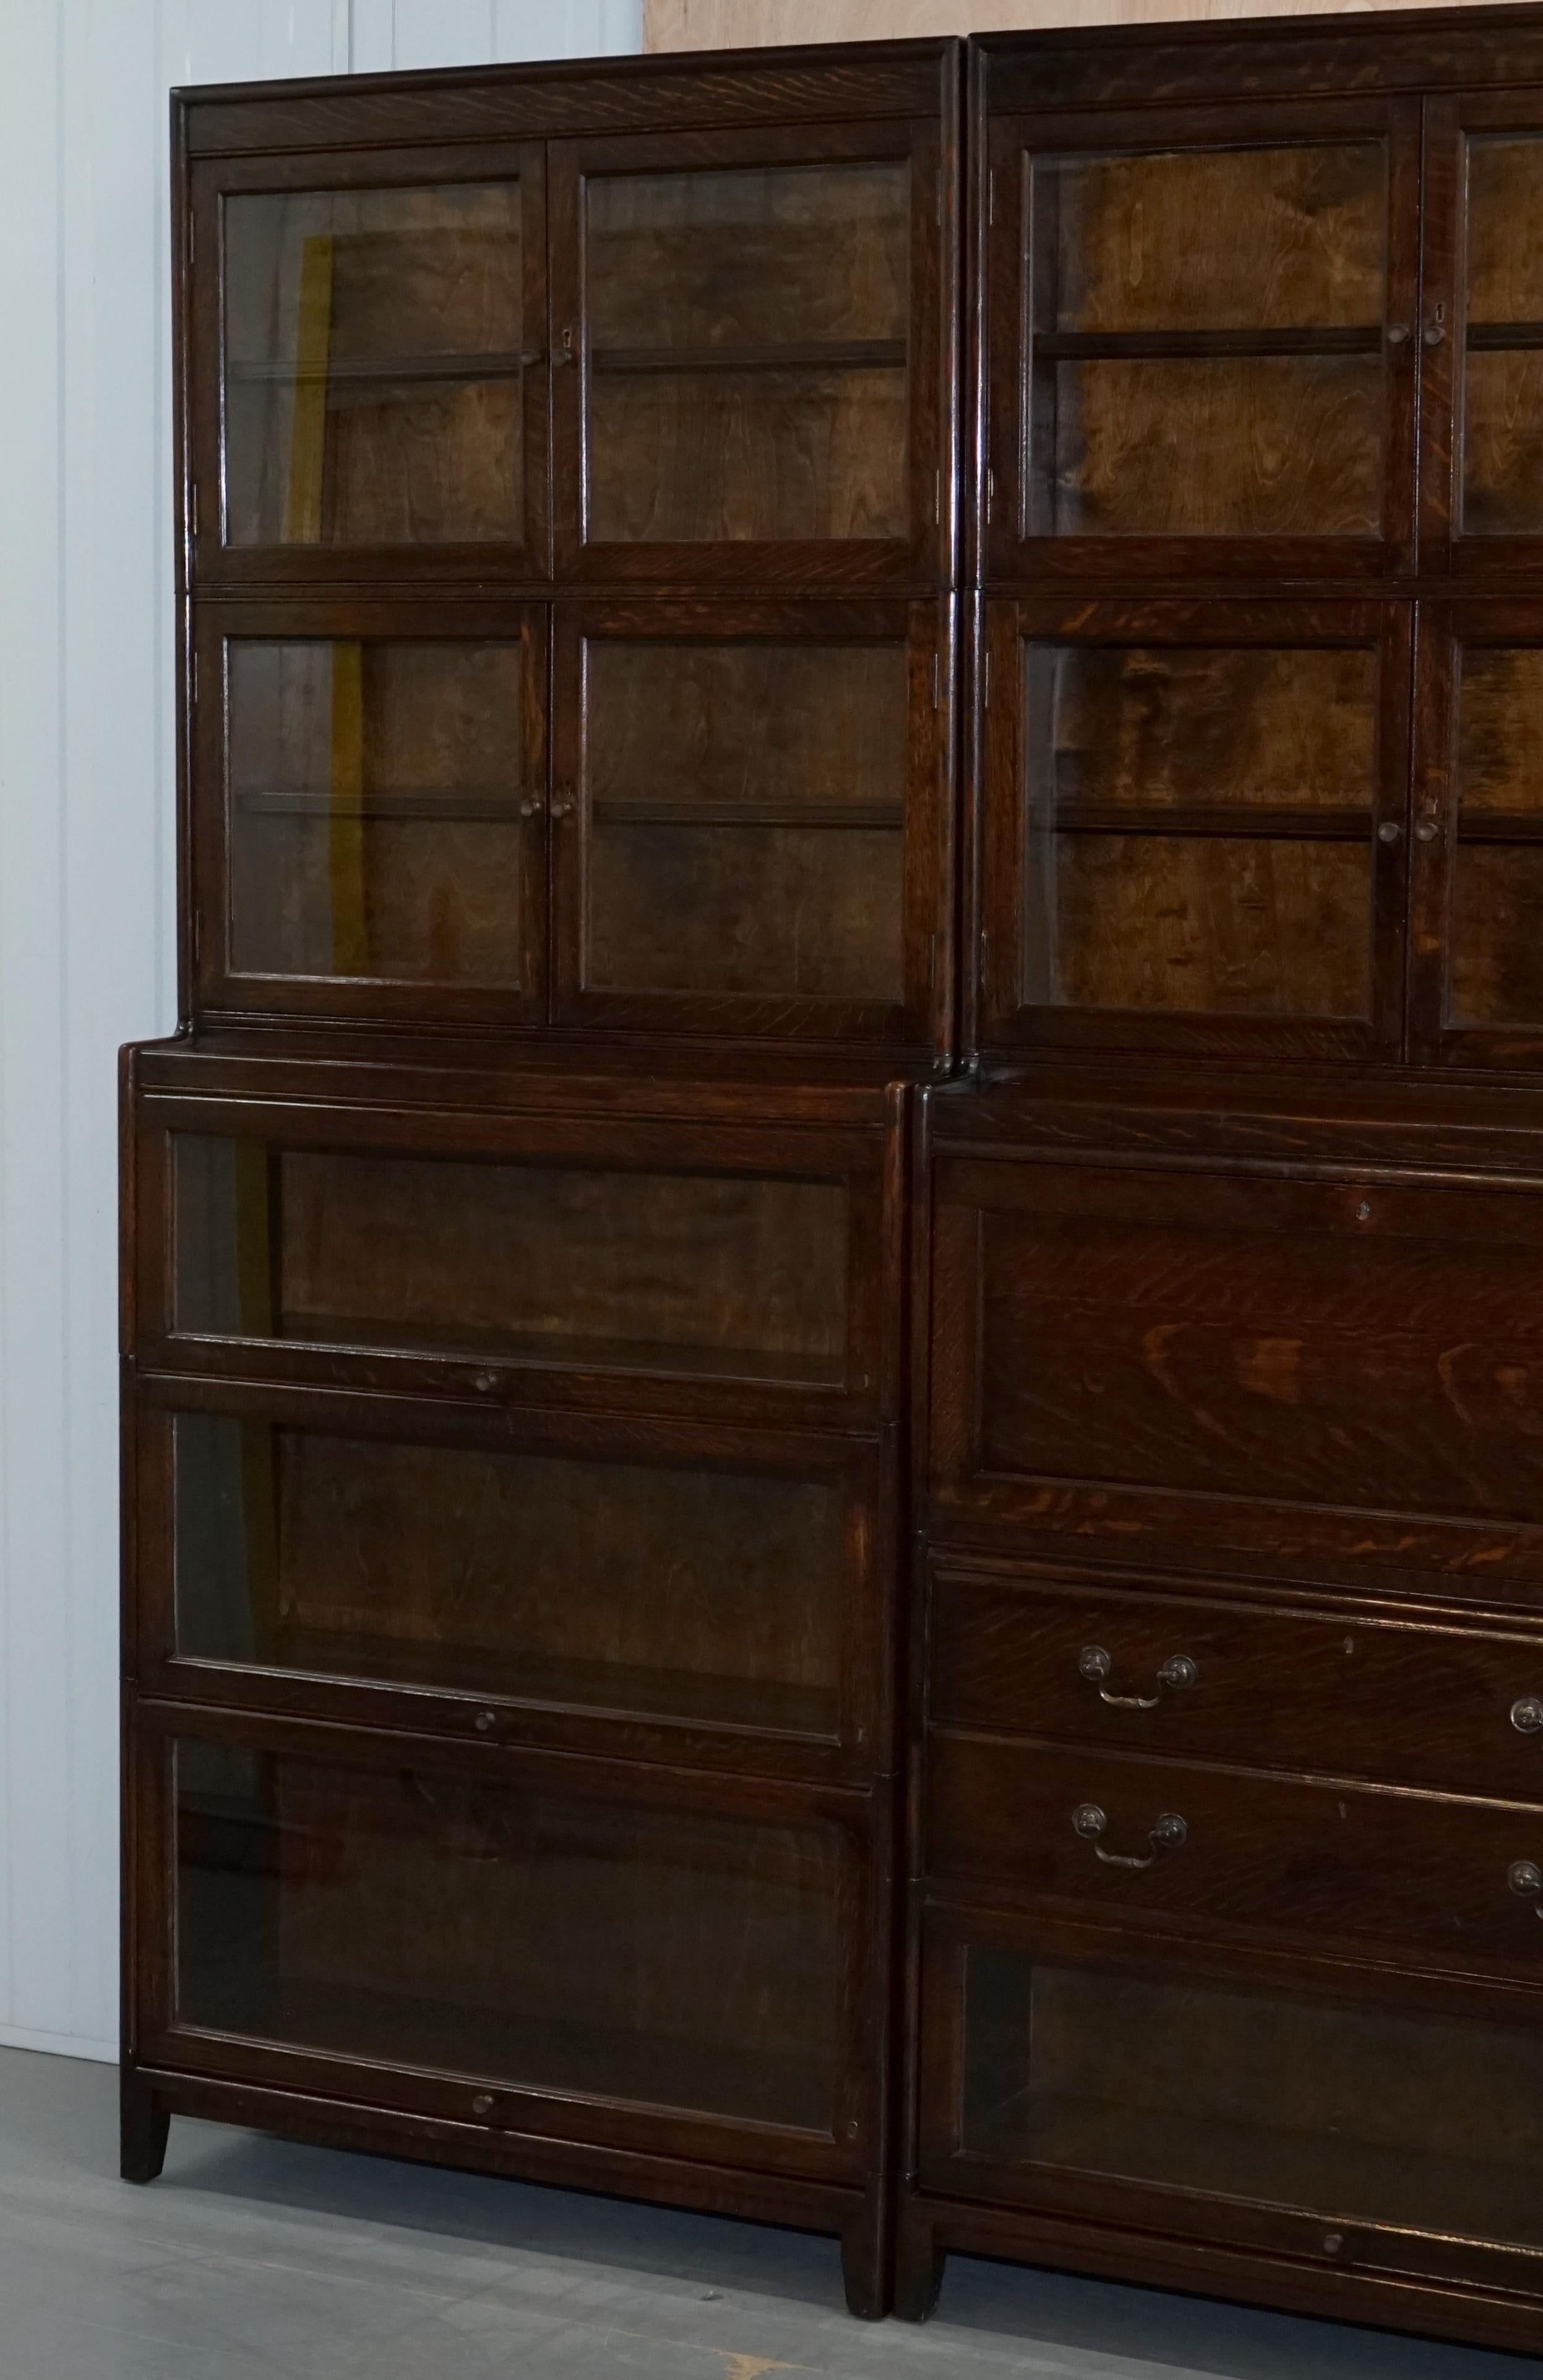 We are delighted to offer for sale this very rare circa 1920 suite of three Gunn solid oak stacking modular Library bookcases with rare drawer section and bureau desk piece

This is an exceptionally rare find, firstly if you are not familiar with